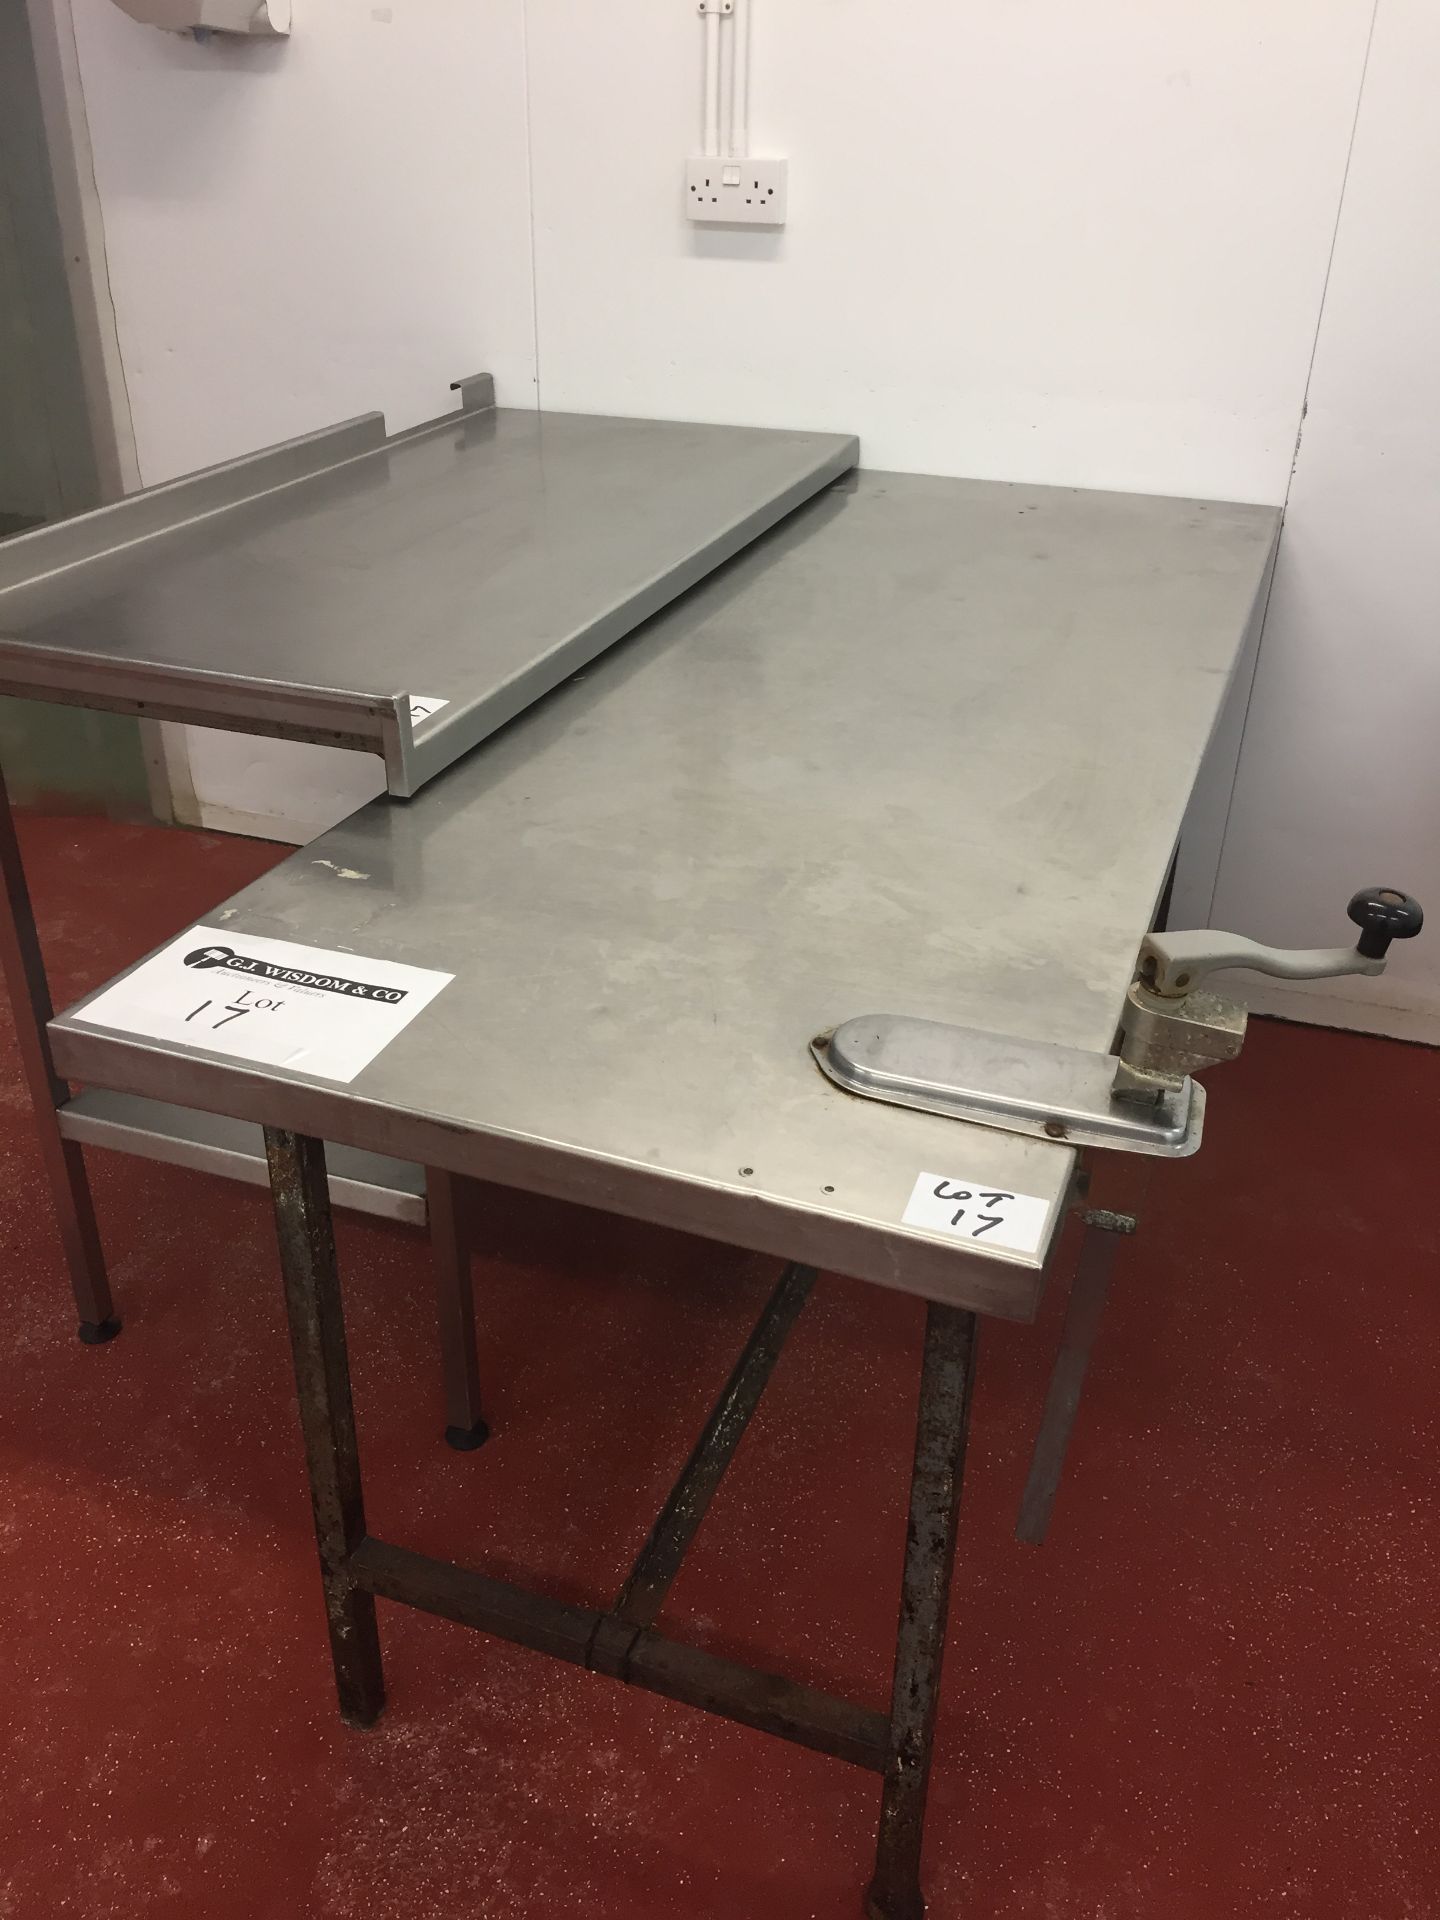 1 x Stainless Steel Table on Iron Legs with Can Opener Attached. Size 183cm x 65cm. 1 Other